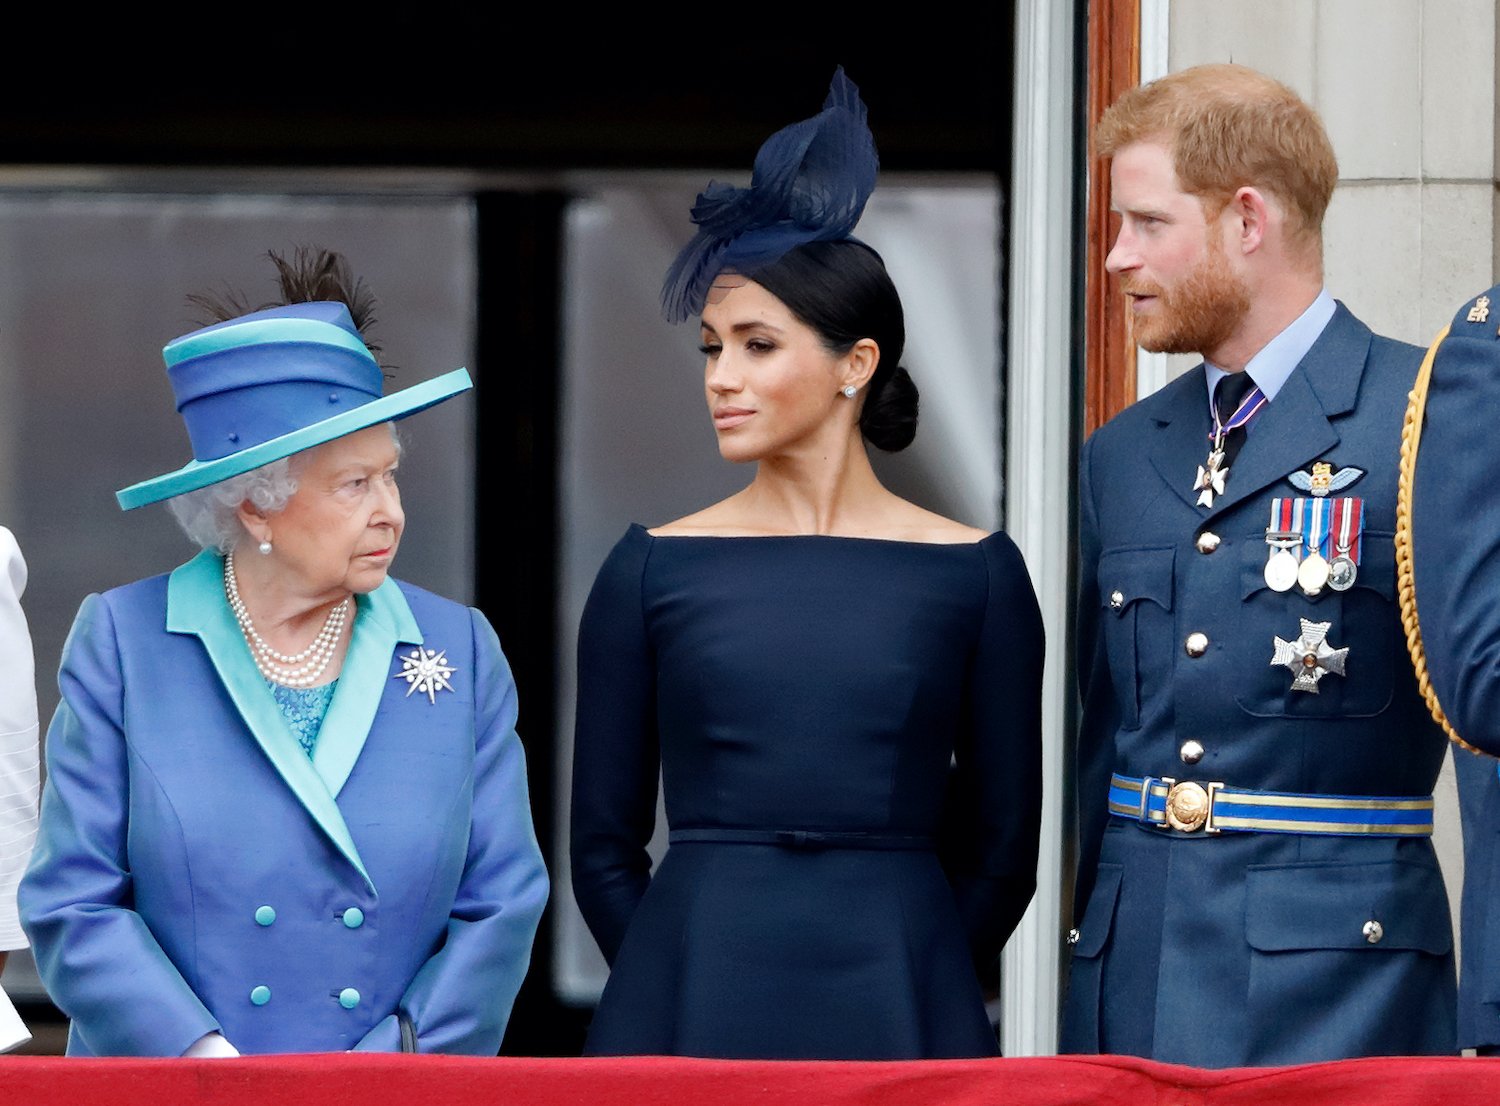 Queen Elizabeth II, Meghan Markle, and Prince Harry watch a flypast to mark the centenary of the Royal Air Force from the balcony of Buckingham Palace on July 10, 2018